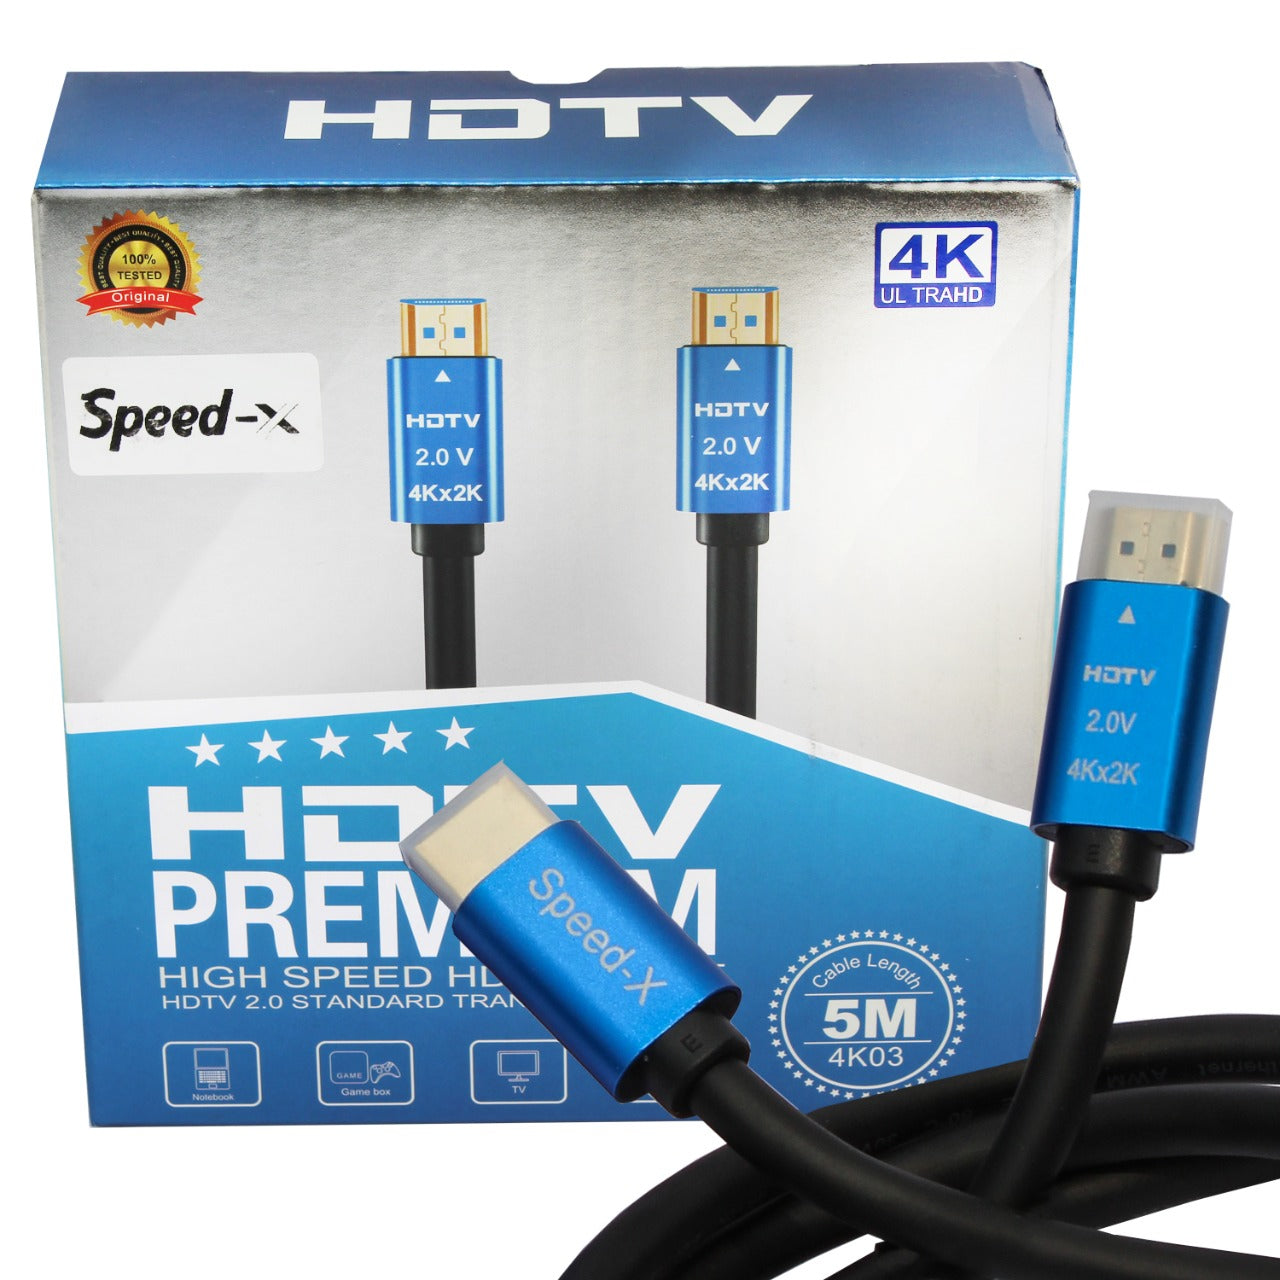 Speed-X 2.0V HDMI Premium cable Ultra HD 4k High Quality Display Resolution Support All Devices HDMI Cable All Size Available